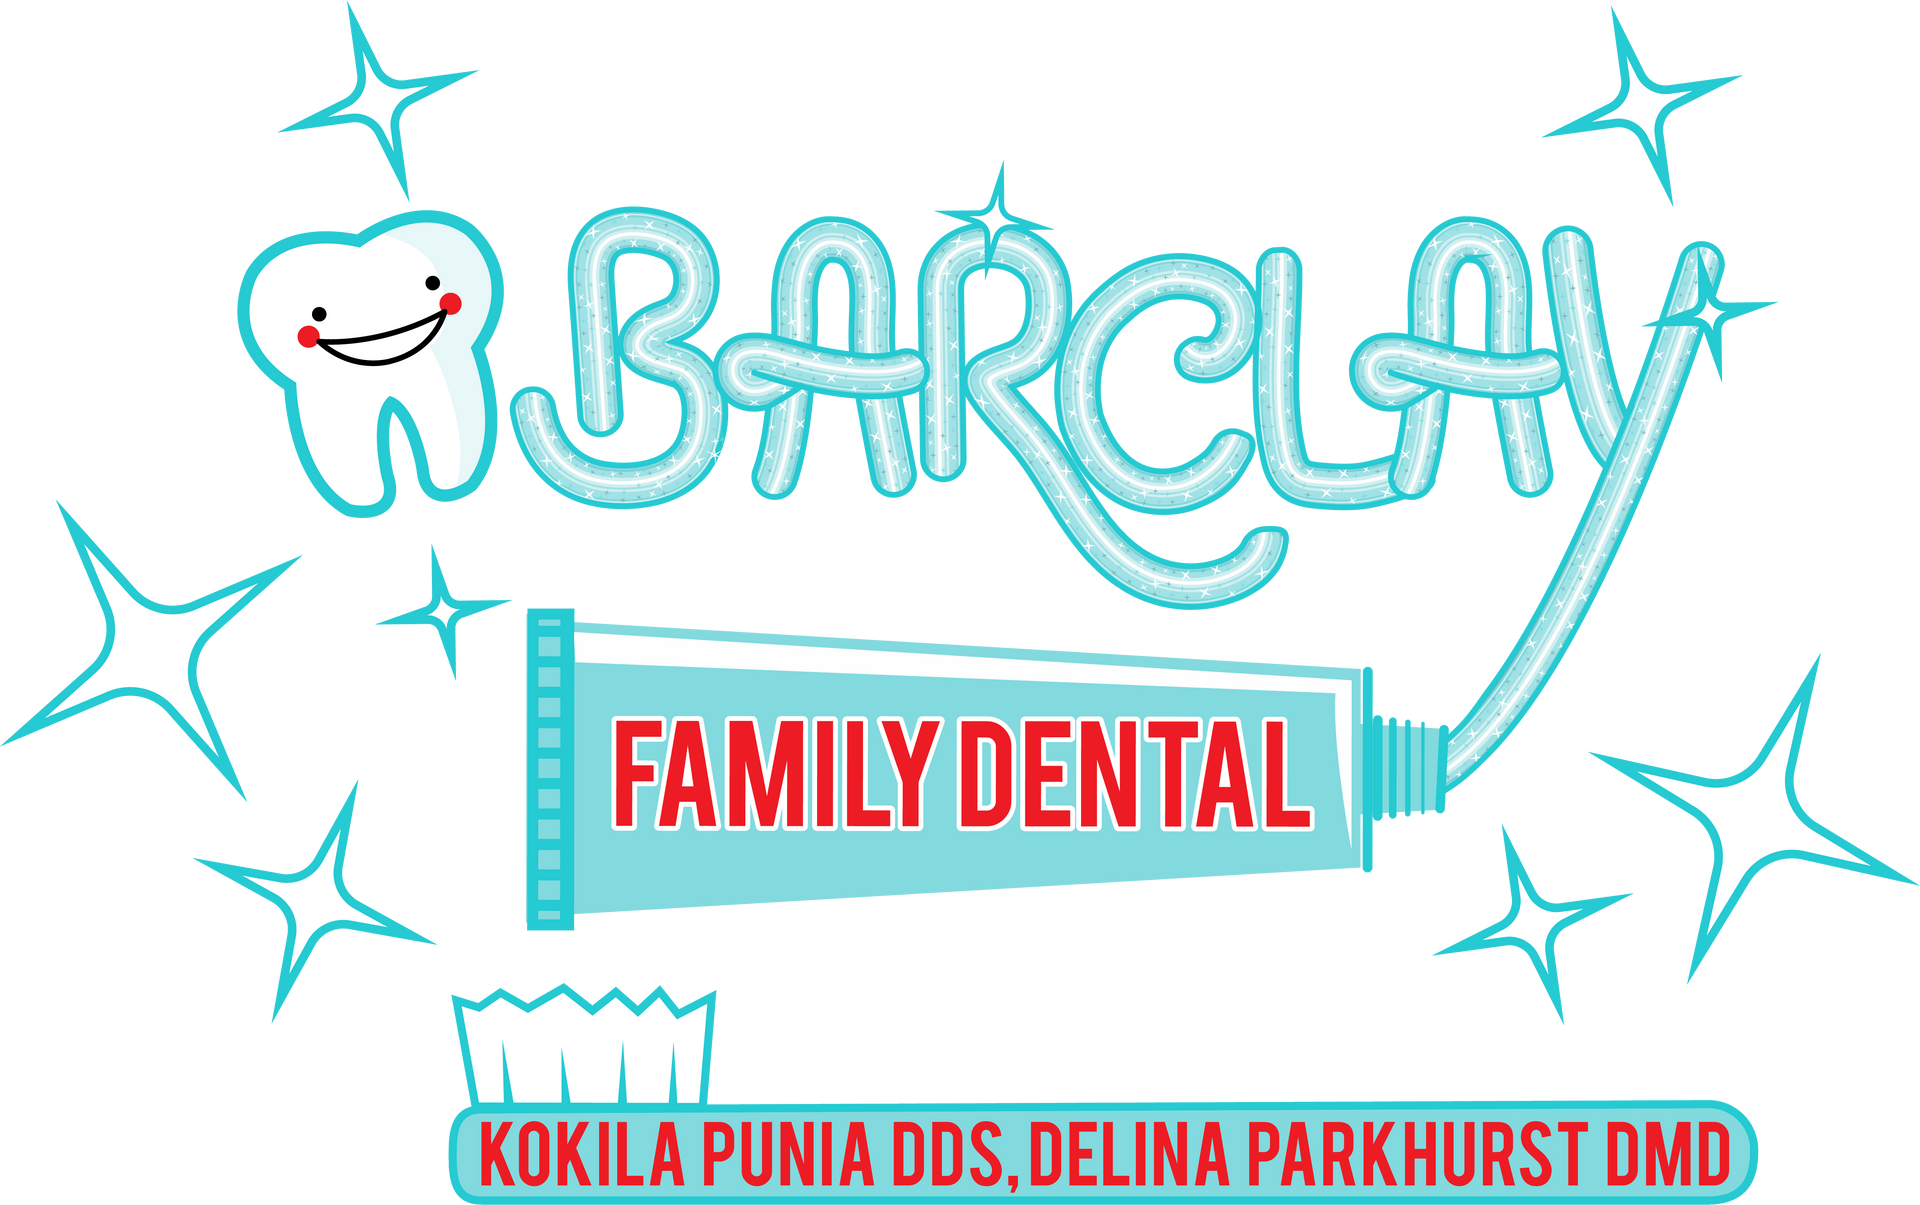 Barclay Family Dental Logo | Best Dentist For Family Dentistry, Dental Implants, and Cosmetic Dentistry in Cherry Hill, NJ